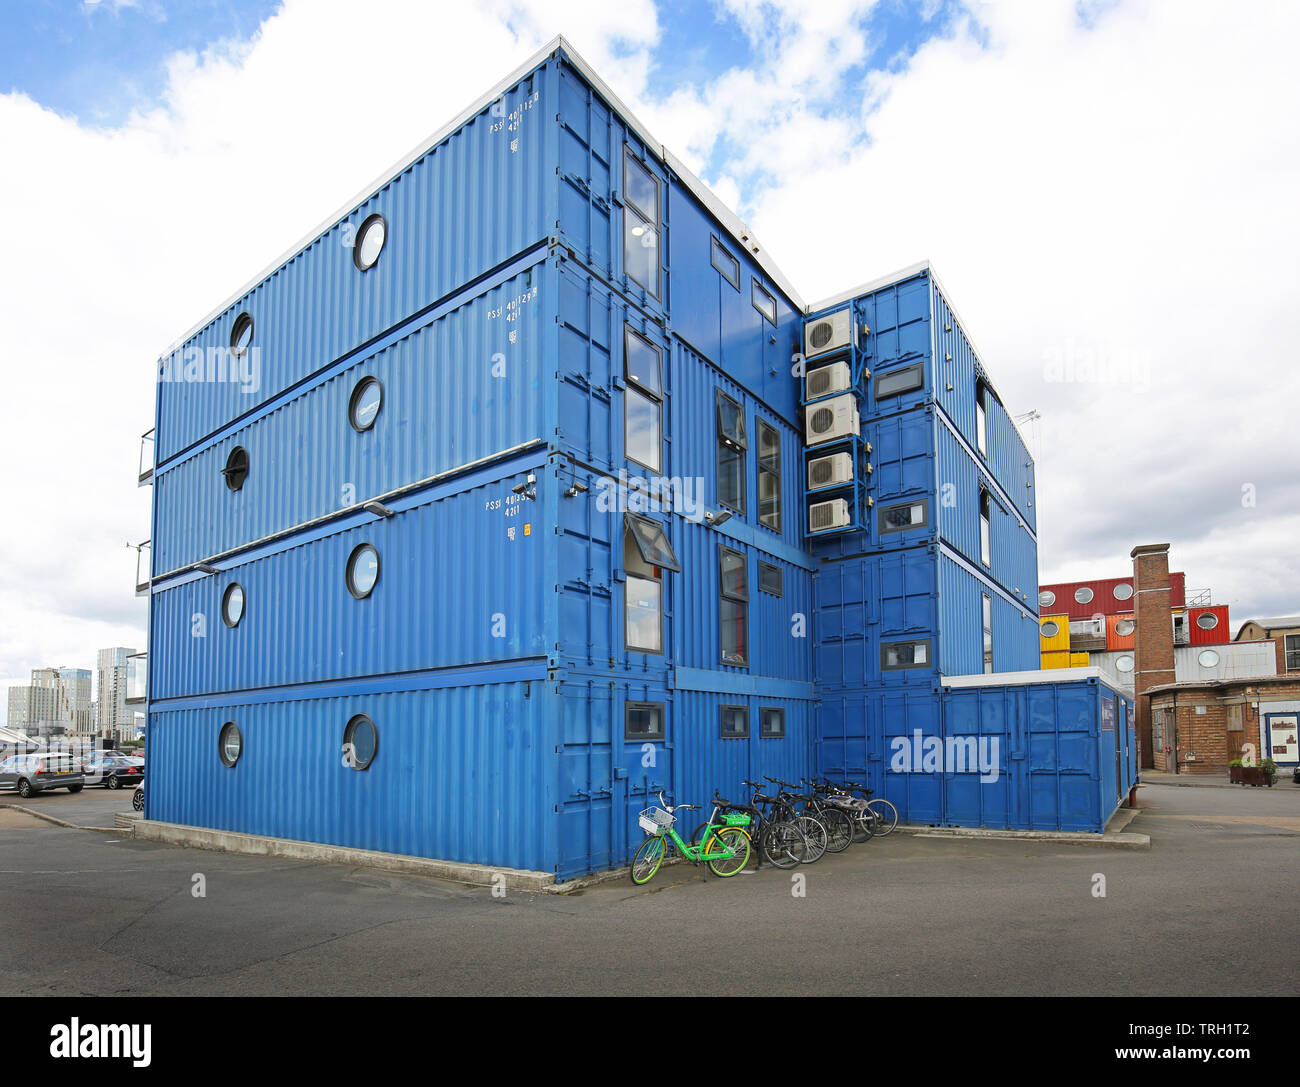 Container City at Trinity Buoy Wharf, London, UK. A collection of live/work spaces constructed from shipping containers. Stock Photo